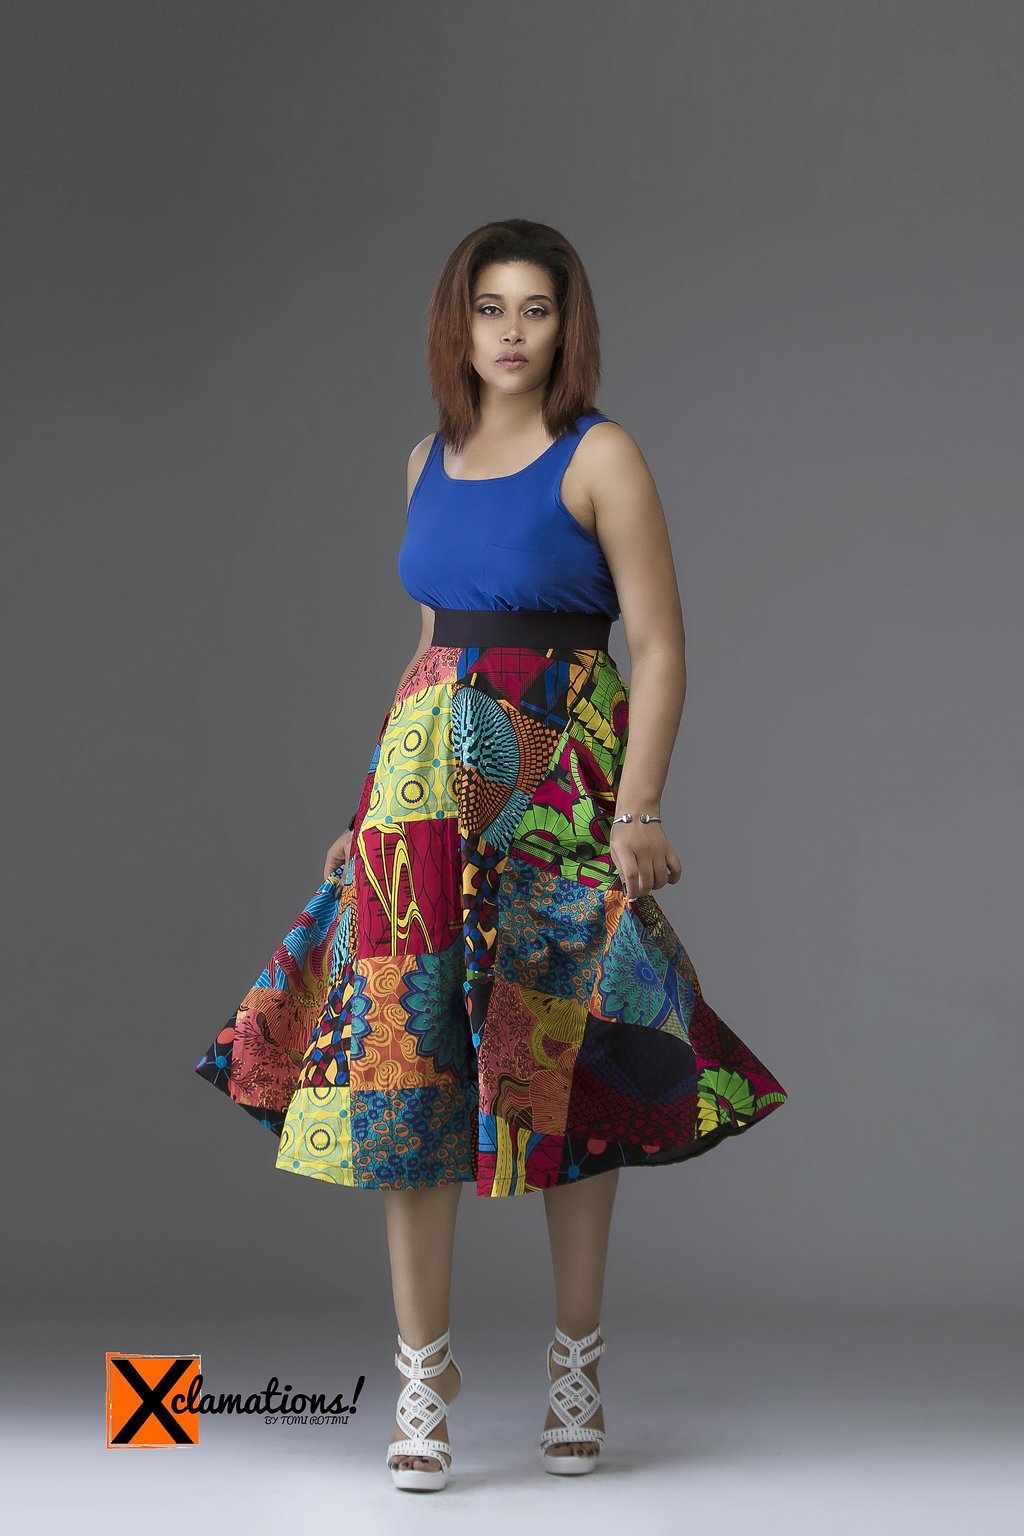 Nigerian Ready to Wear Brand Features Adunni Ade for its Summer Signatures Collection